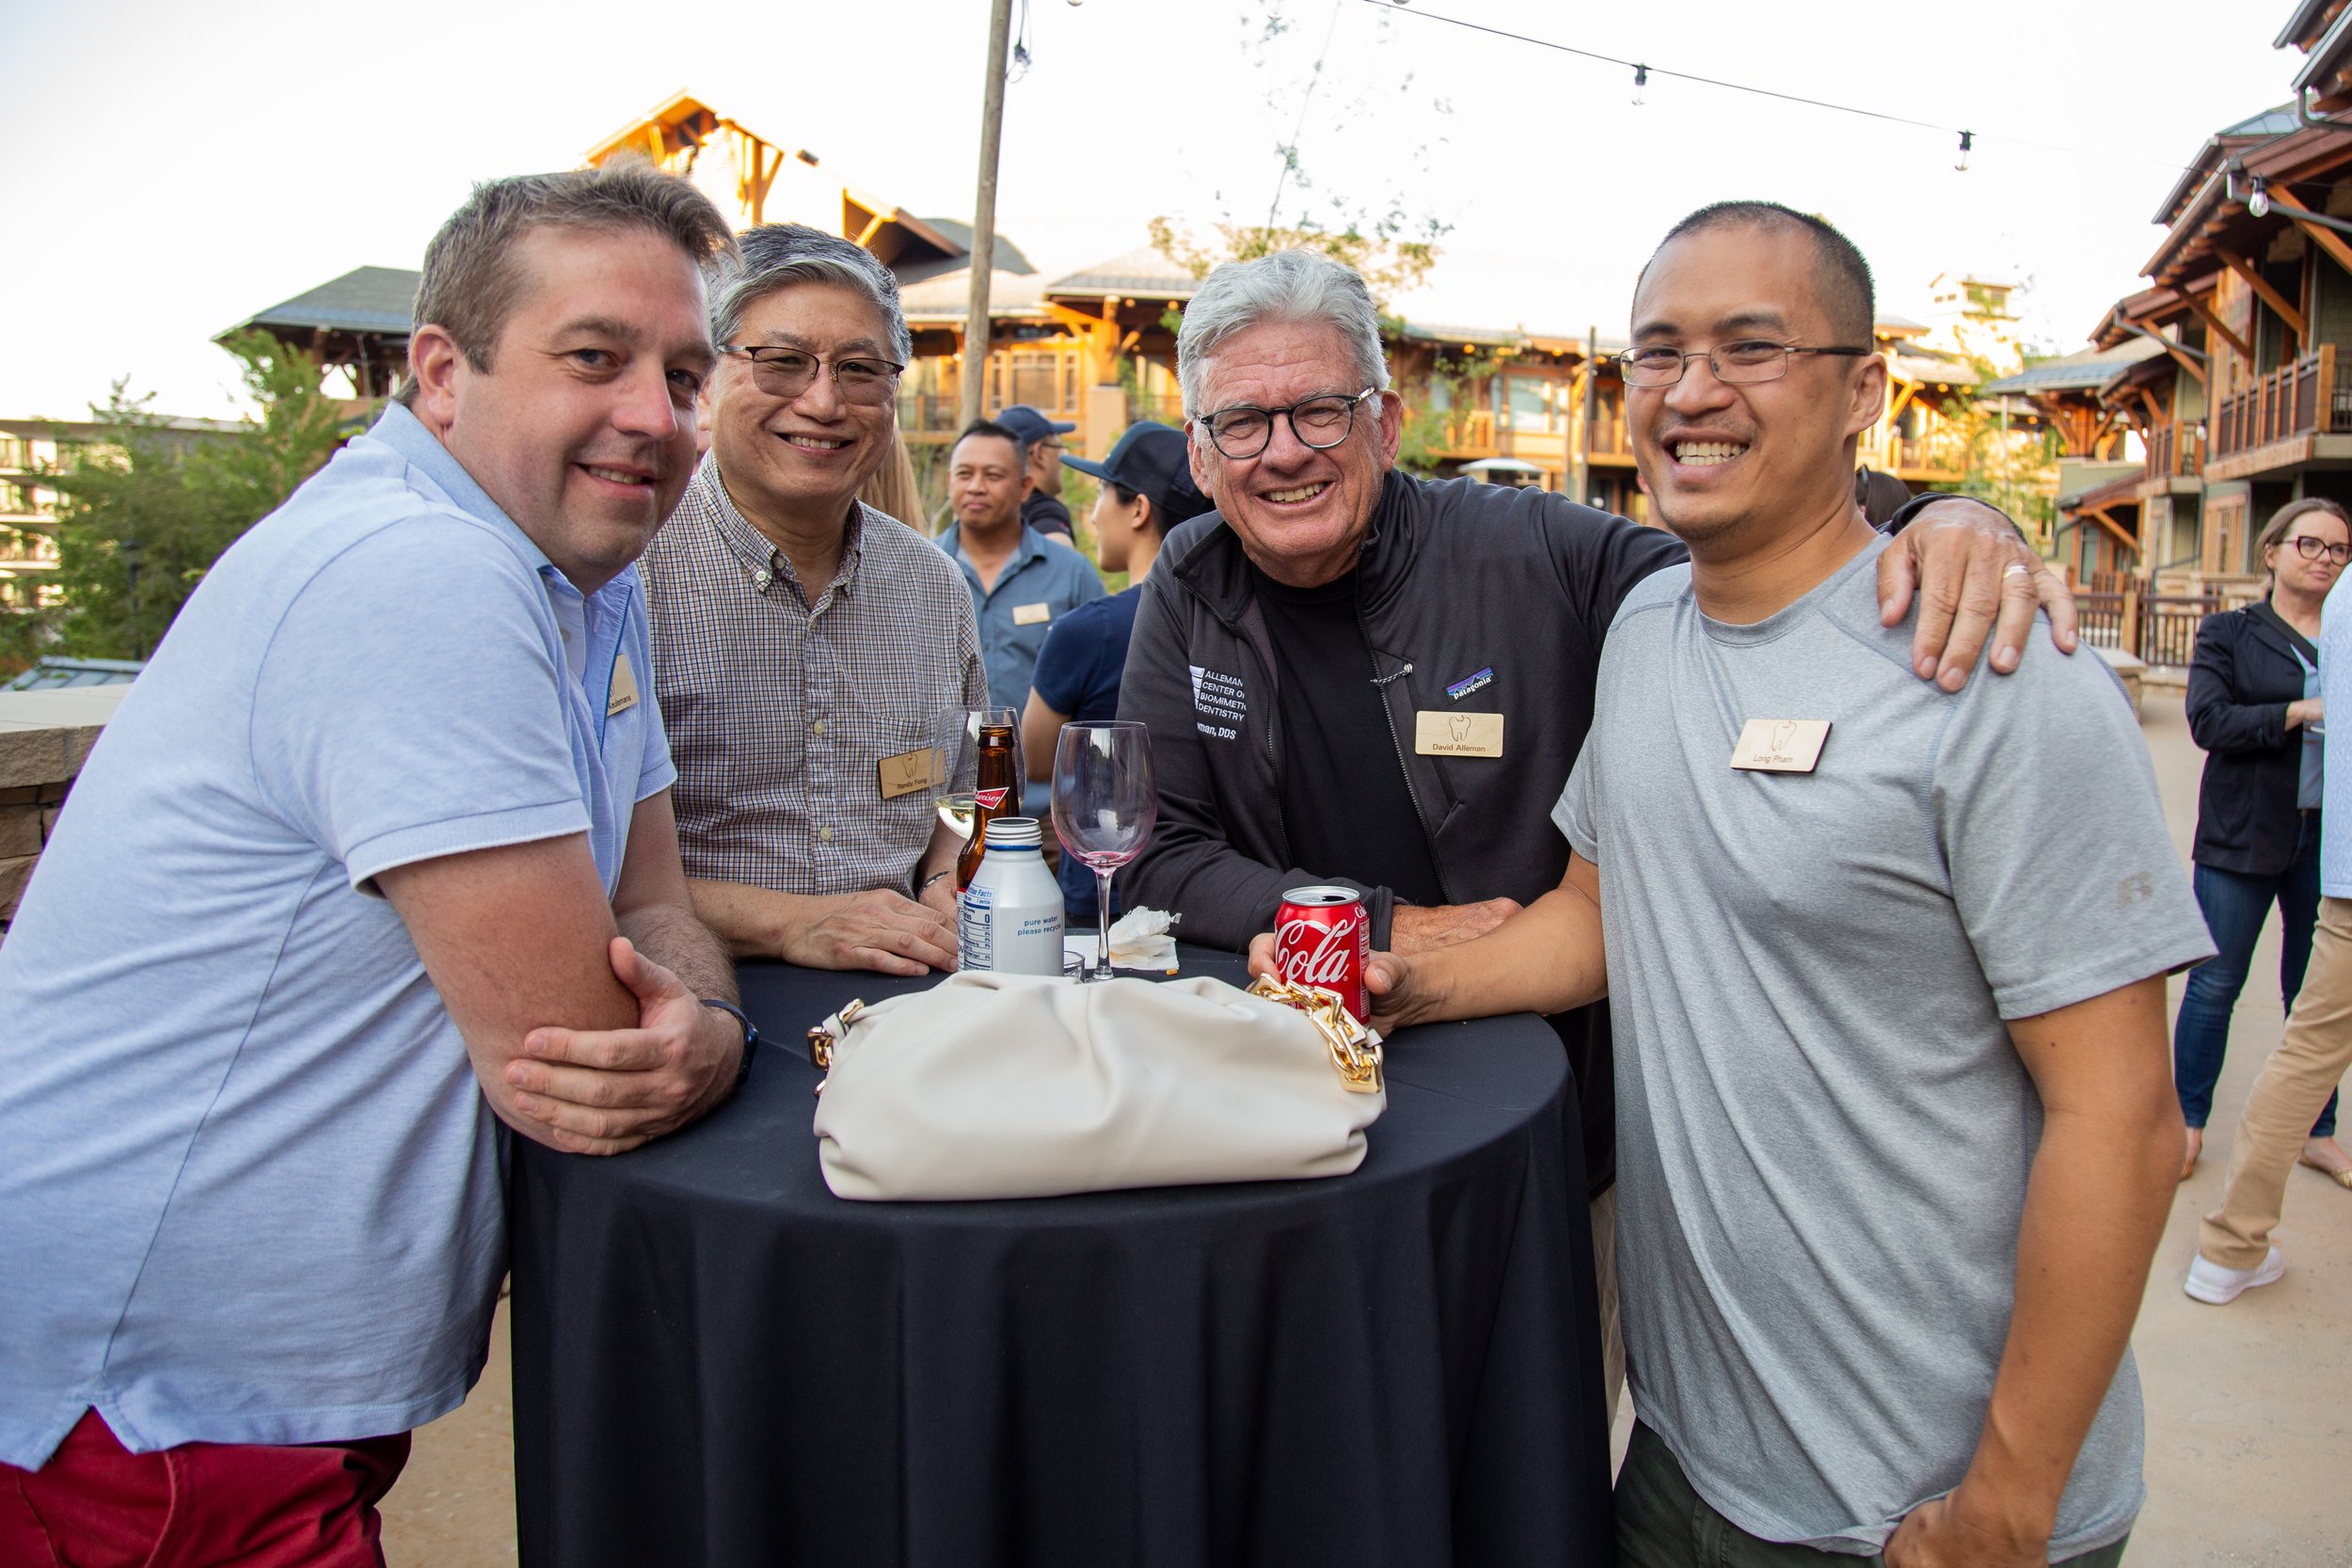 Drs. Keulemans, Fong, Alleman and Lam at the Alleman Center 2022 Retreat.jpg